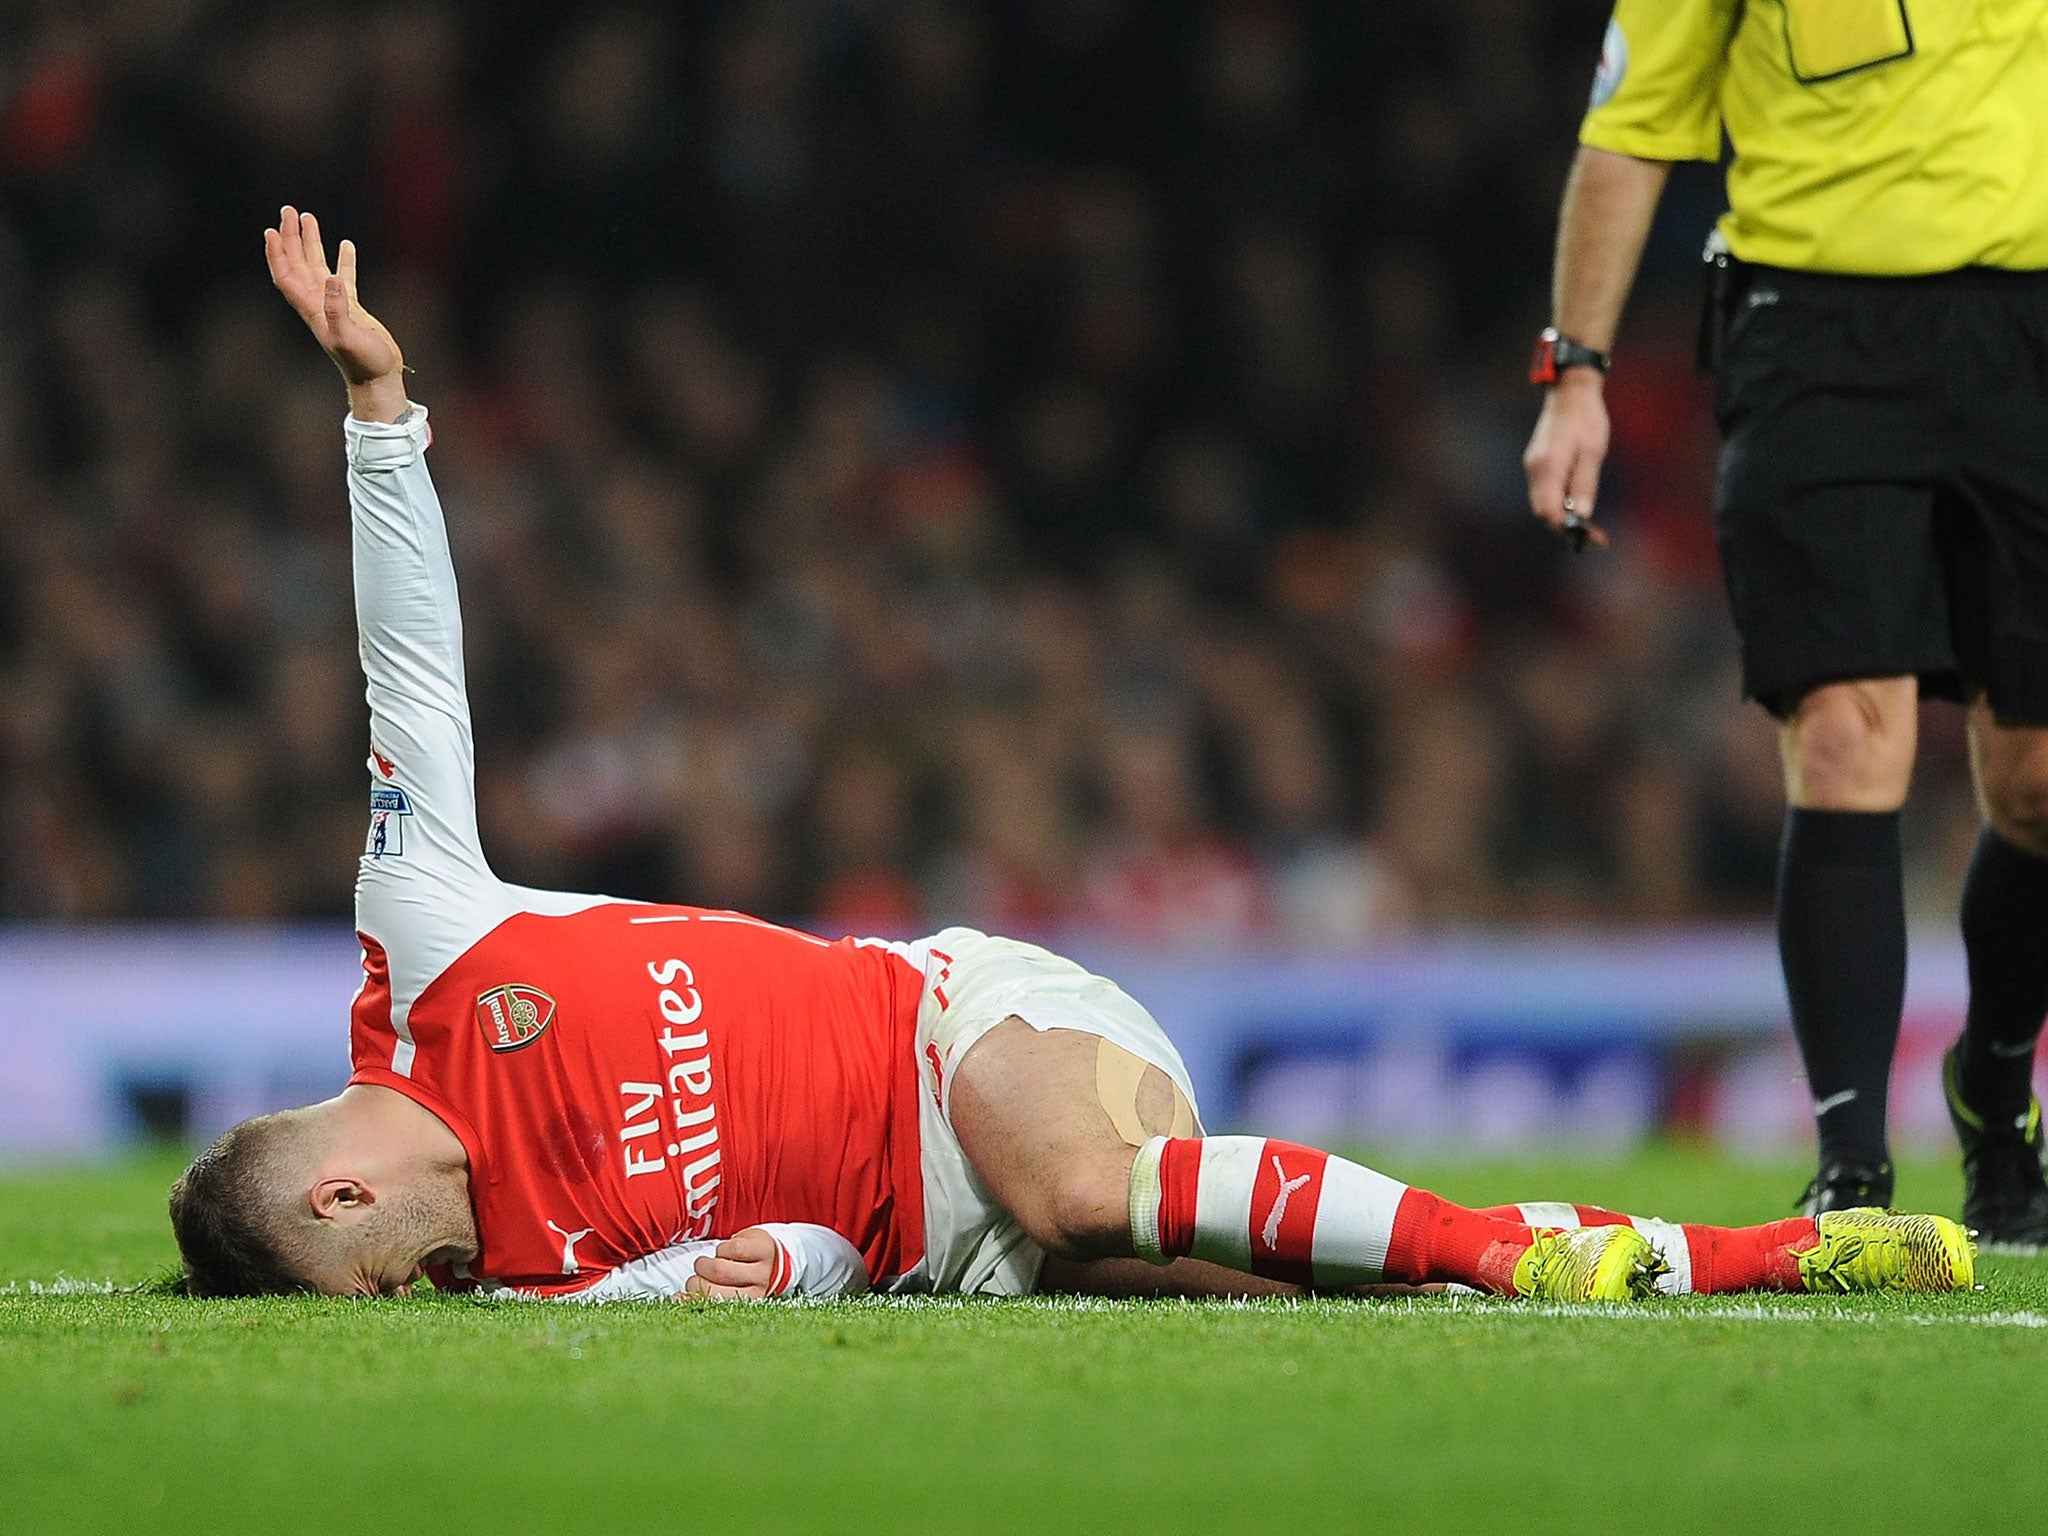 Wilshere suffered damaged ankle ligament in the 2-1 defeat to Manchester United